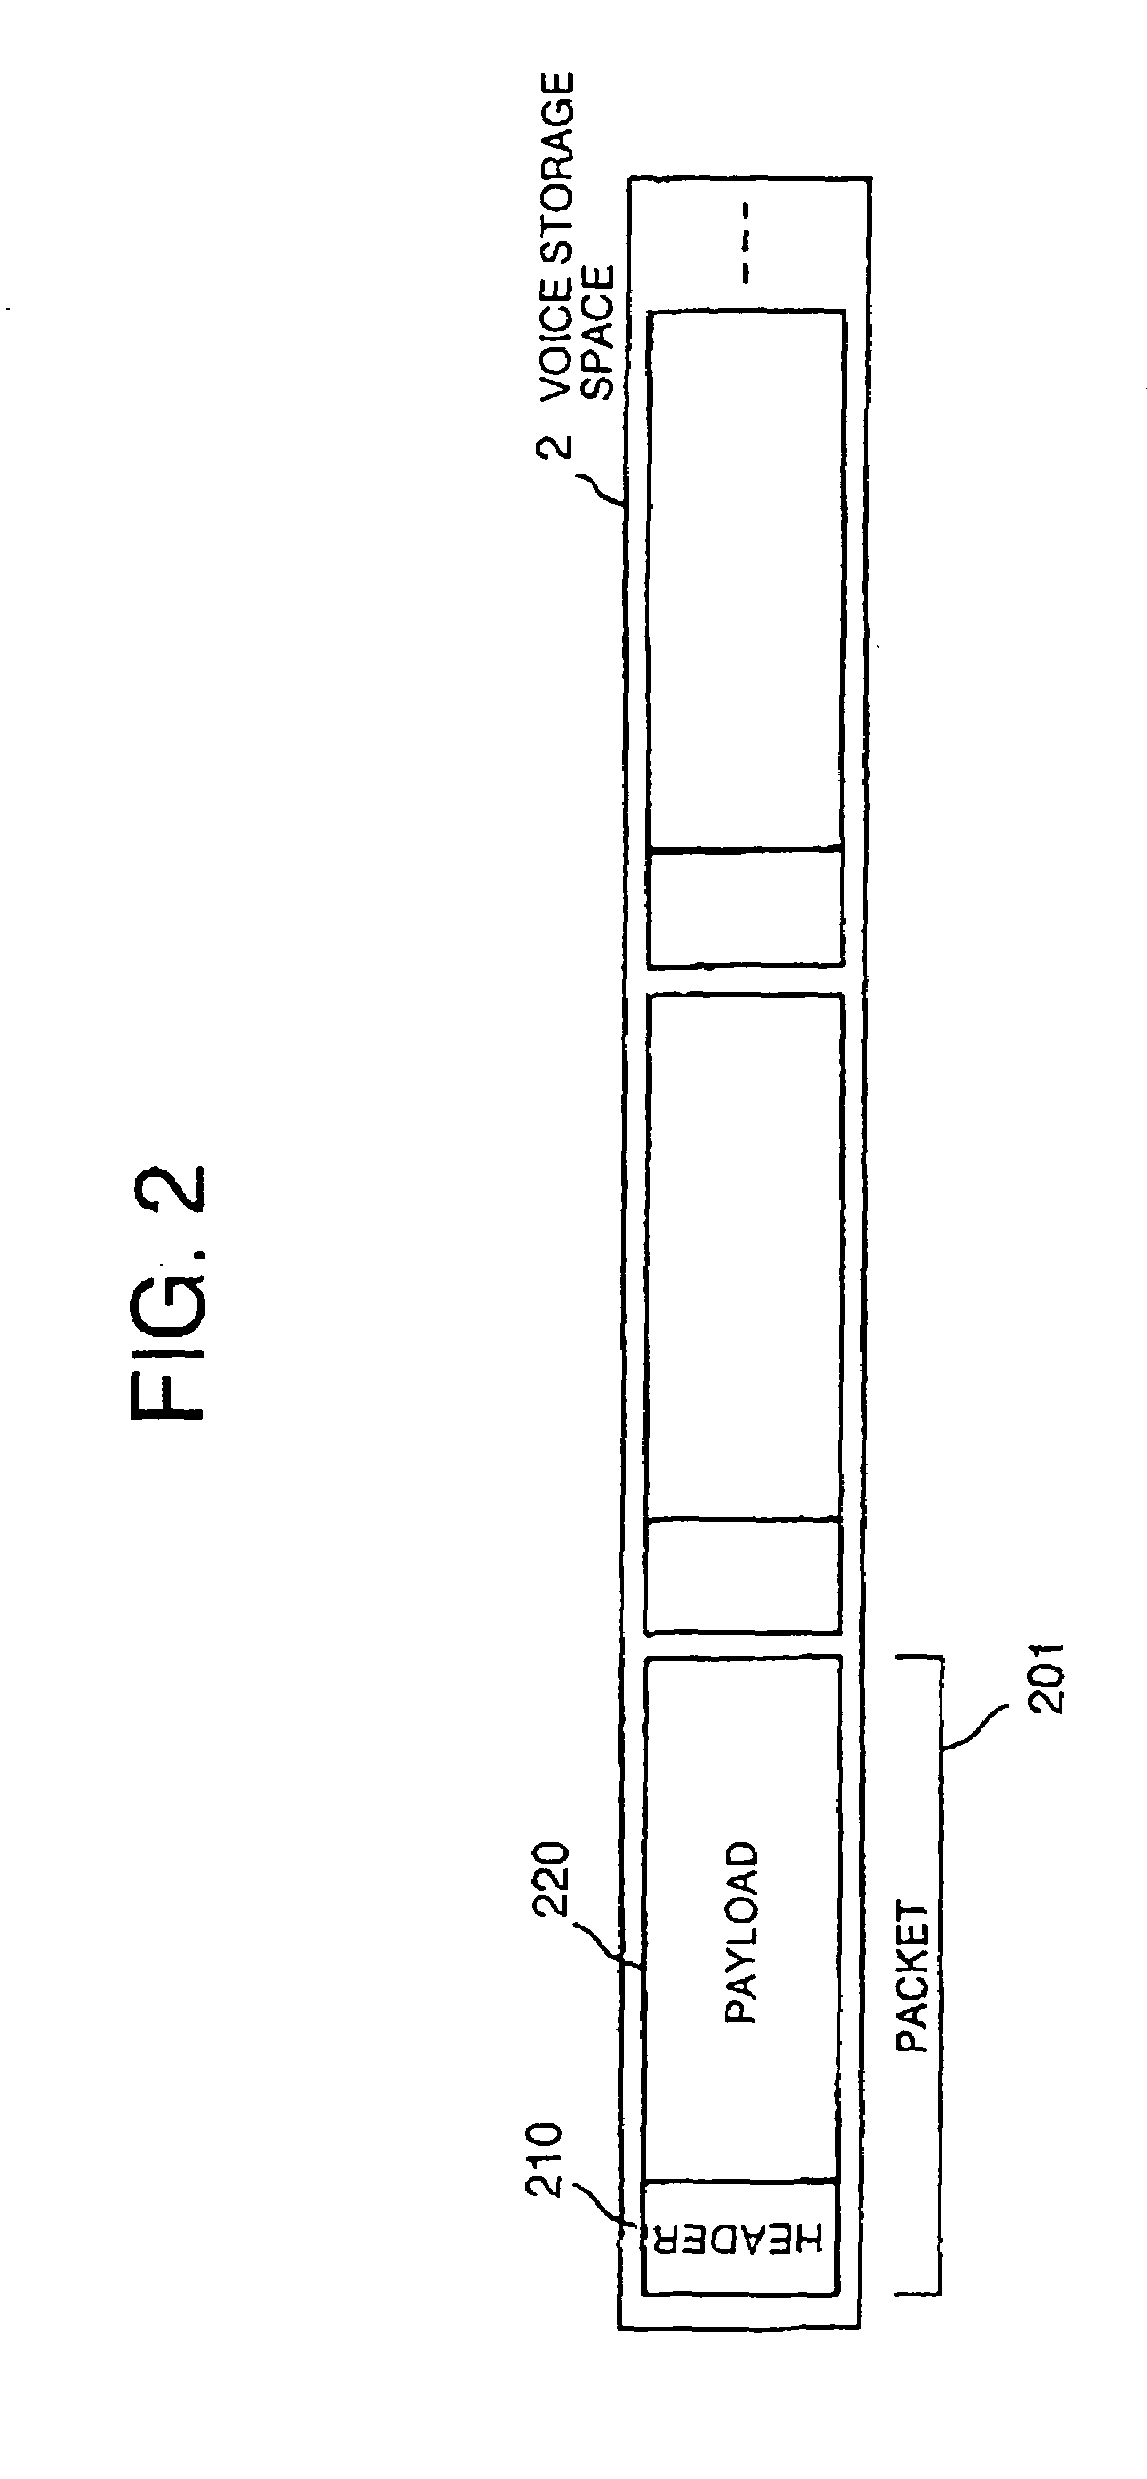 Voice storage device and voice coding device